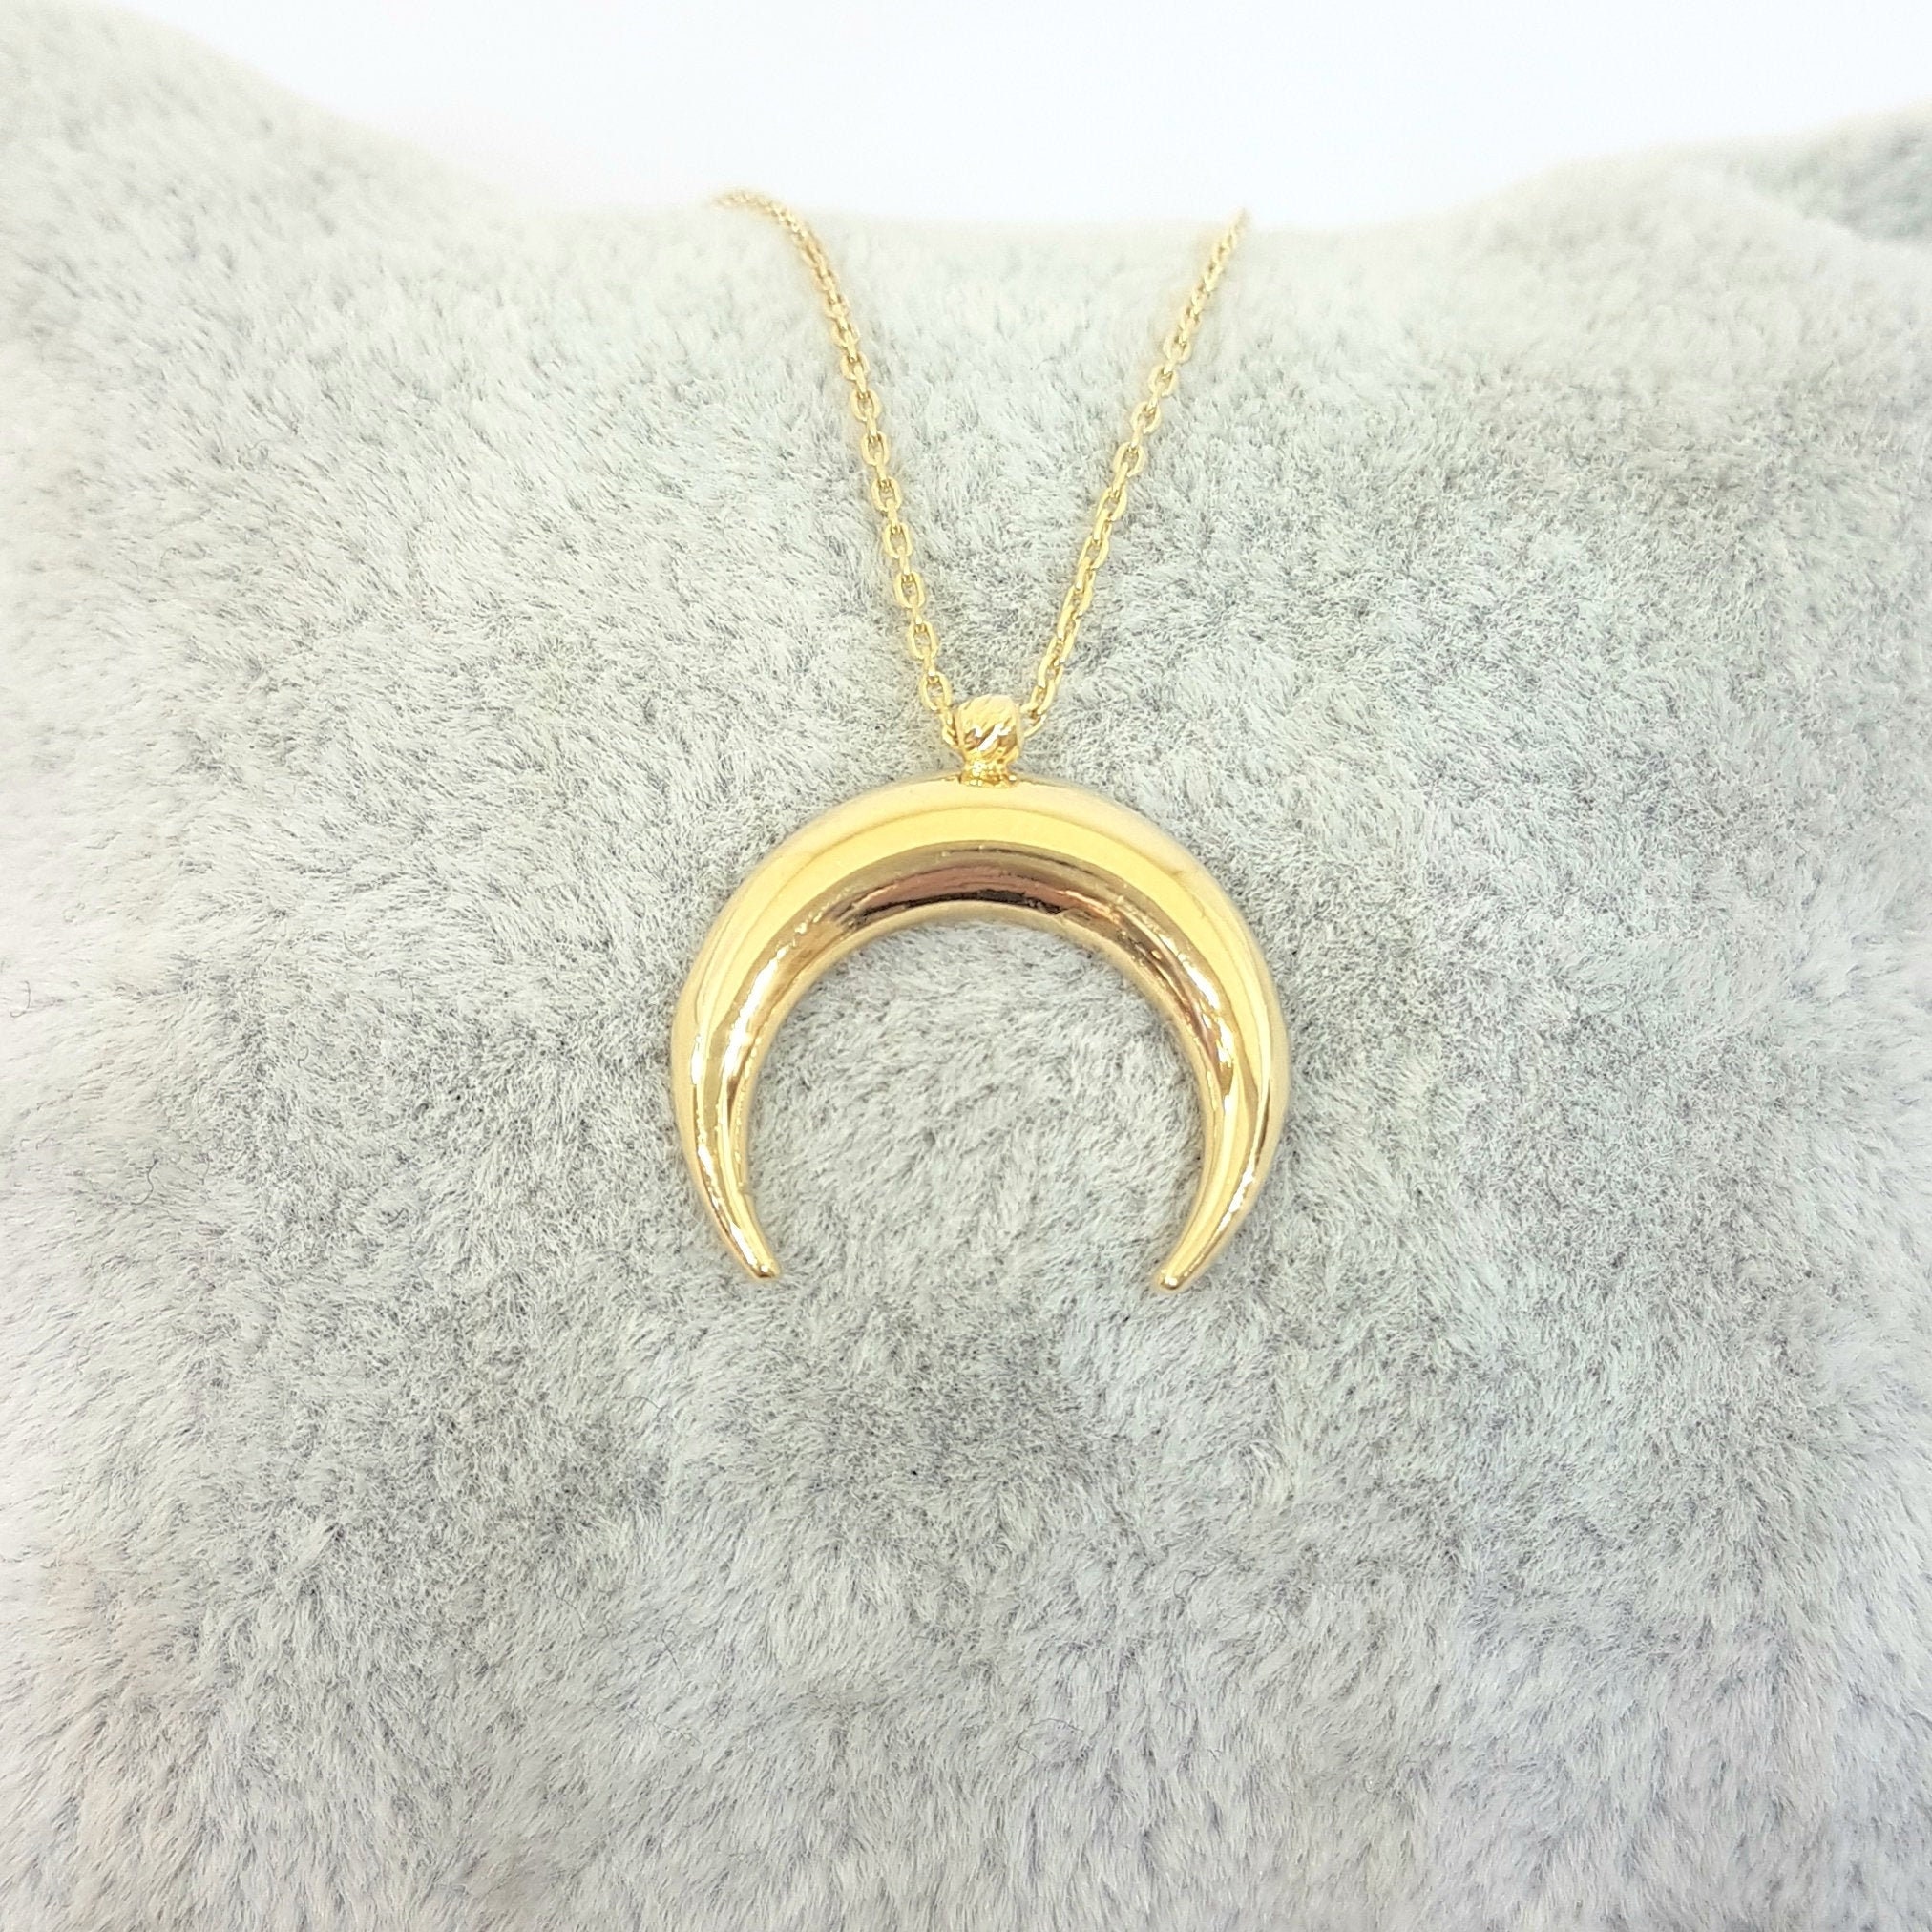 Buy Mini Crescent Moon Diamond Necklace in 14k Gold / Double Horn Diamond  Necklace / Graduation Gift / Gift for Mom Online in India - Etsy